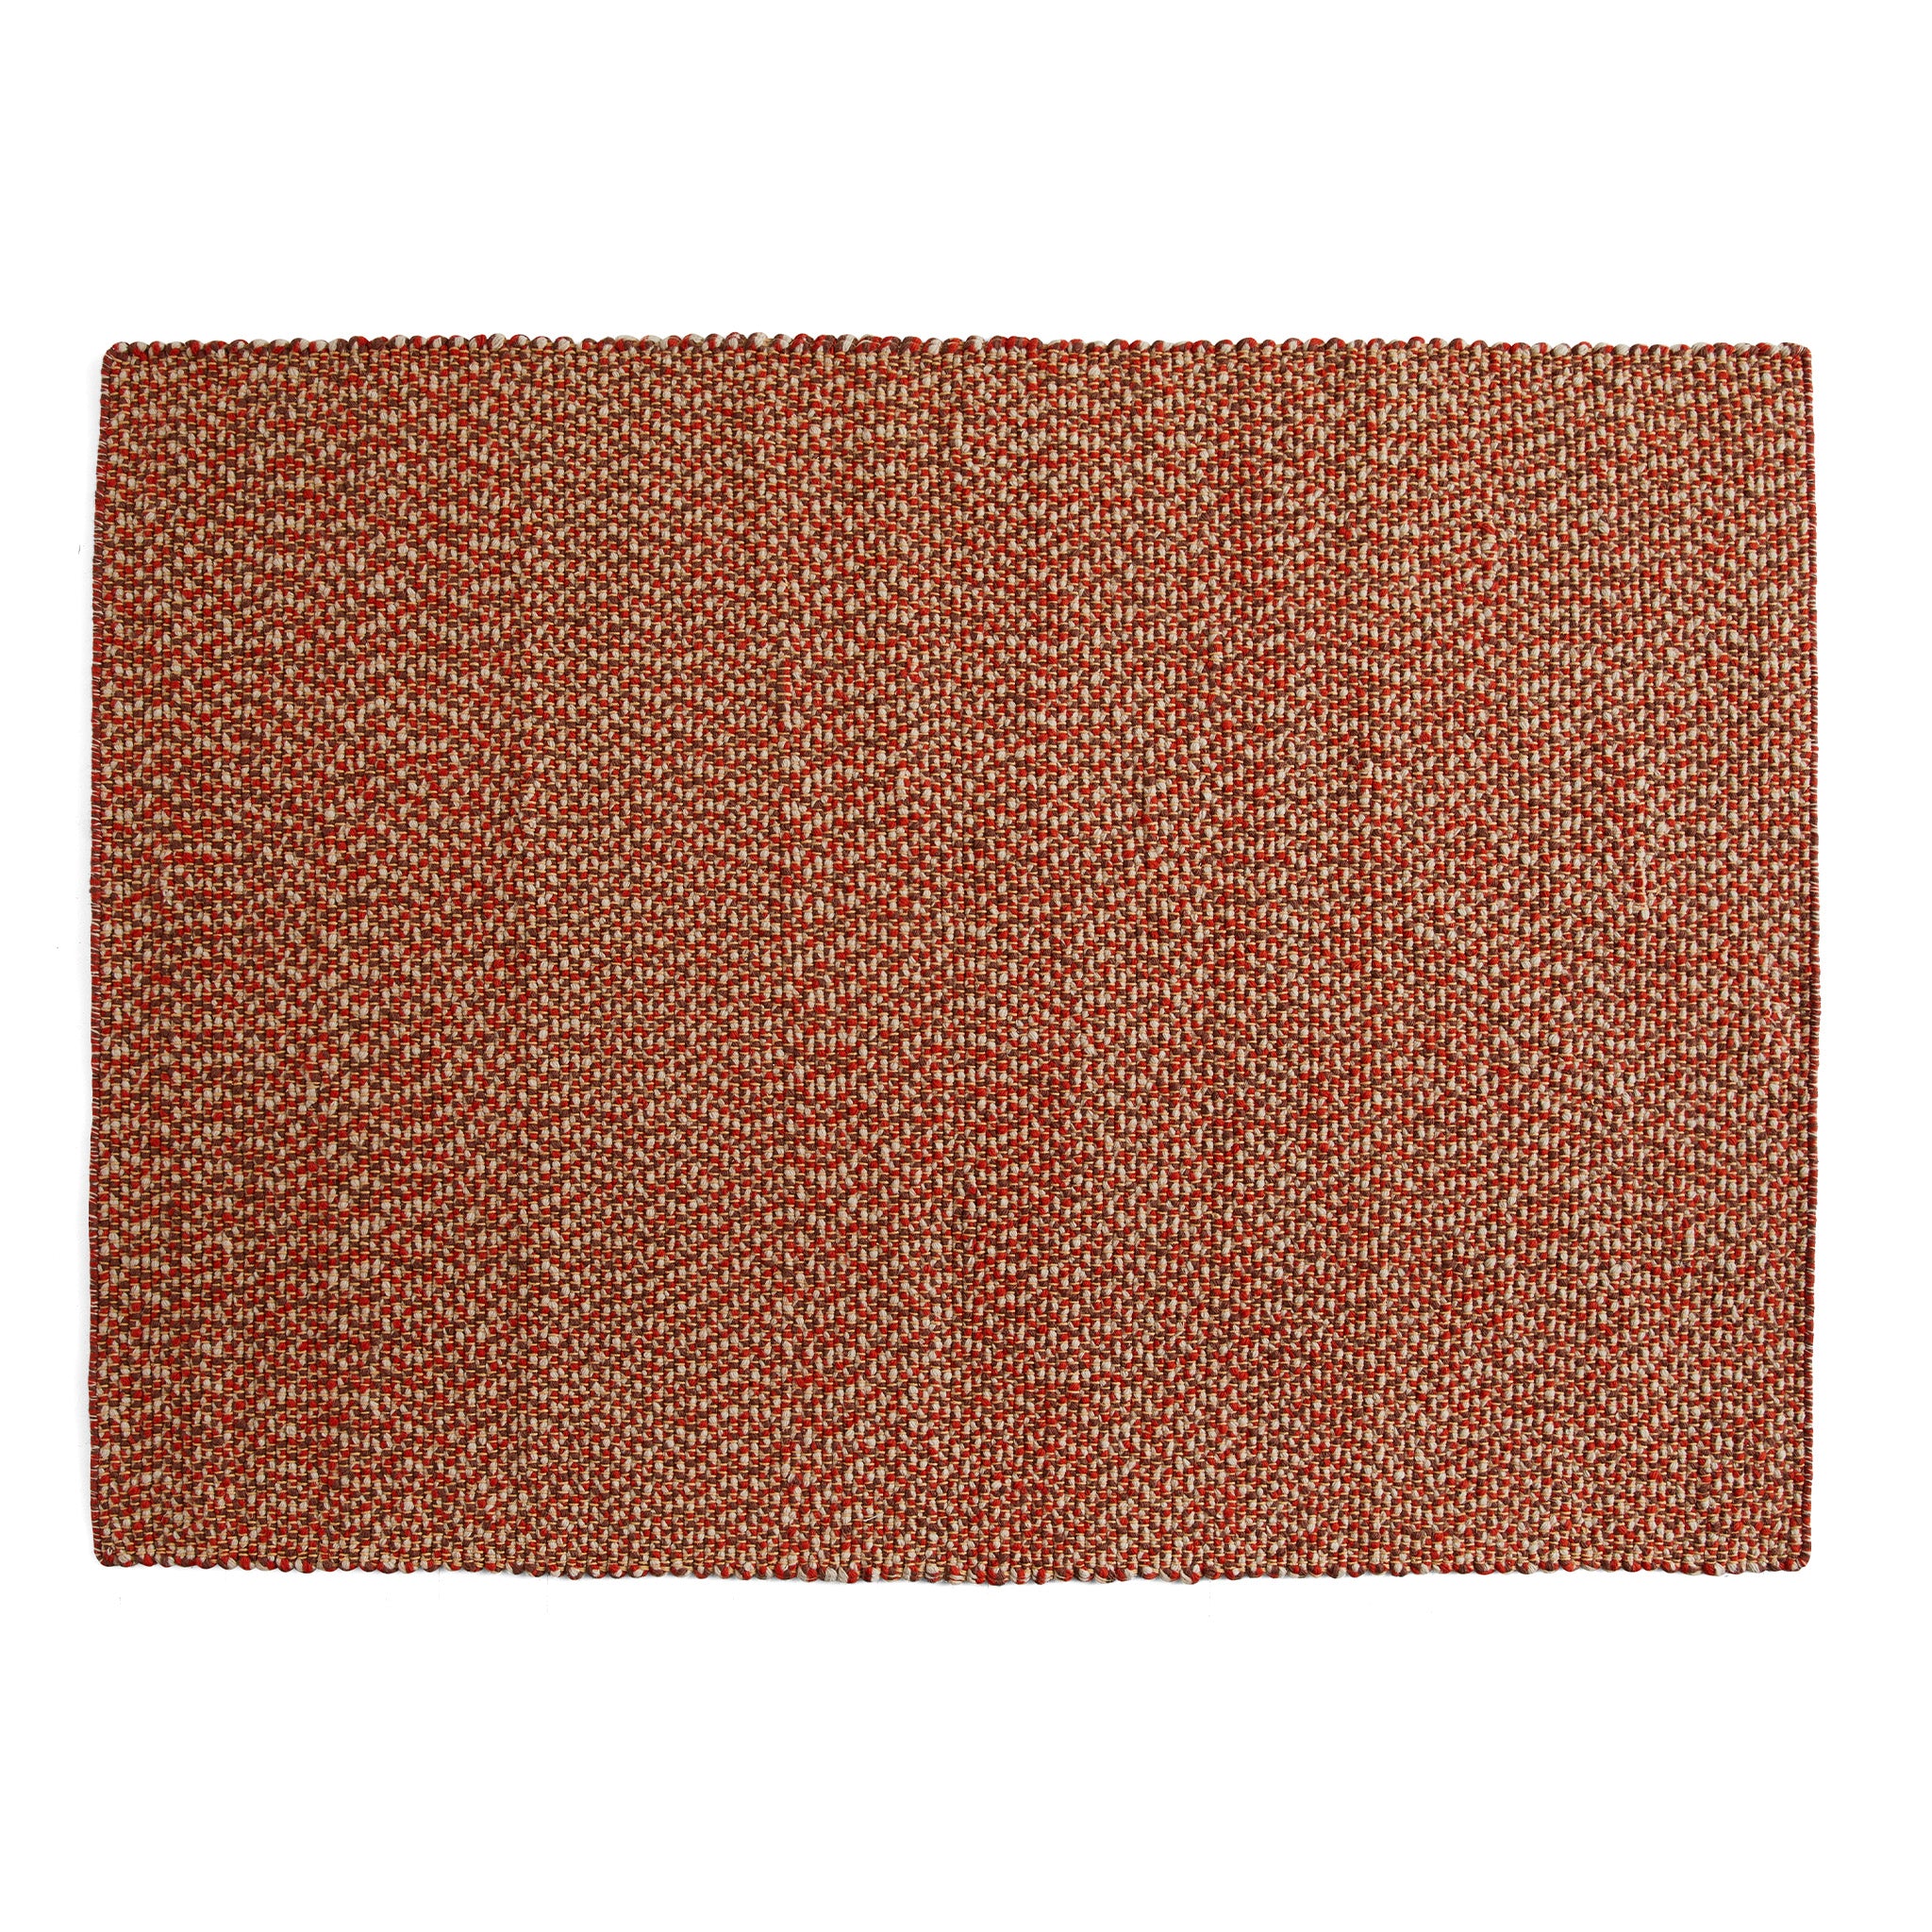 This item is unavailable -   Braided rag rugs, Rugs on carpet